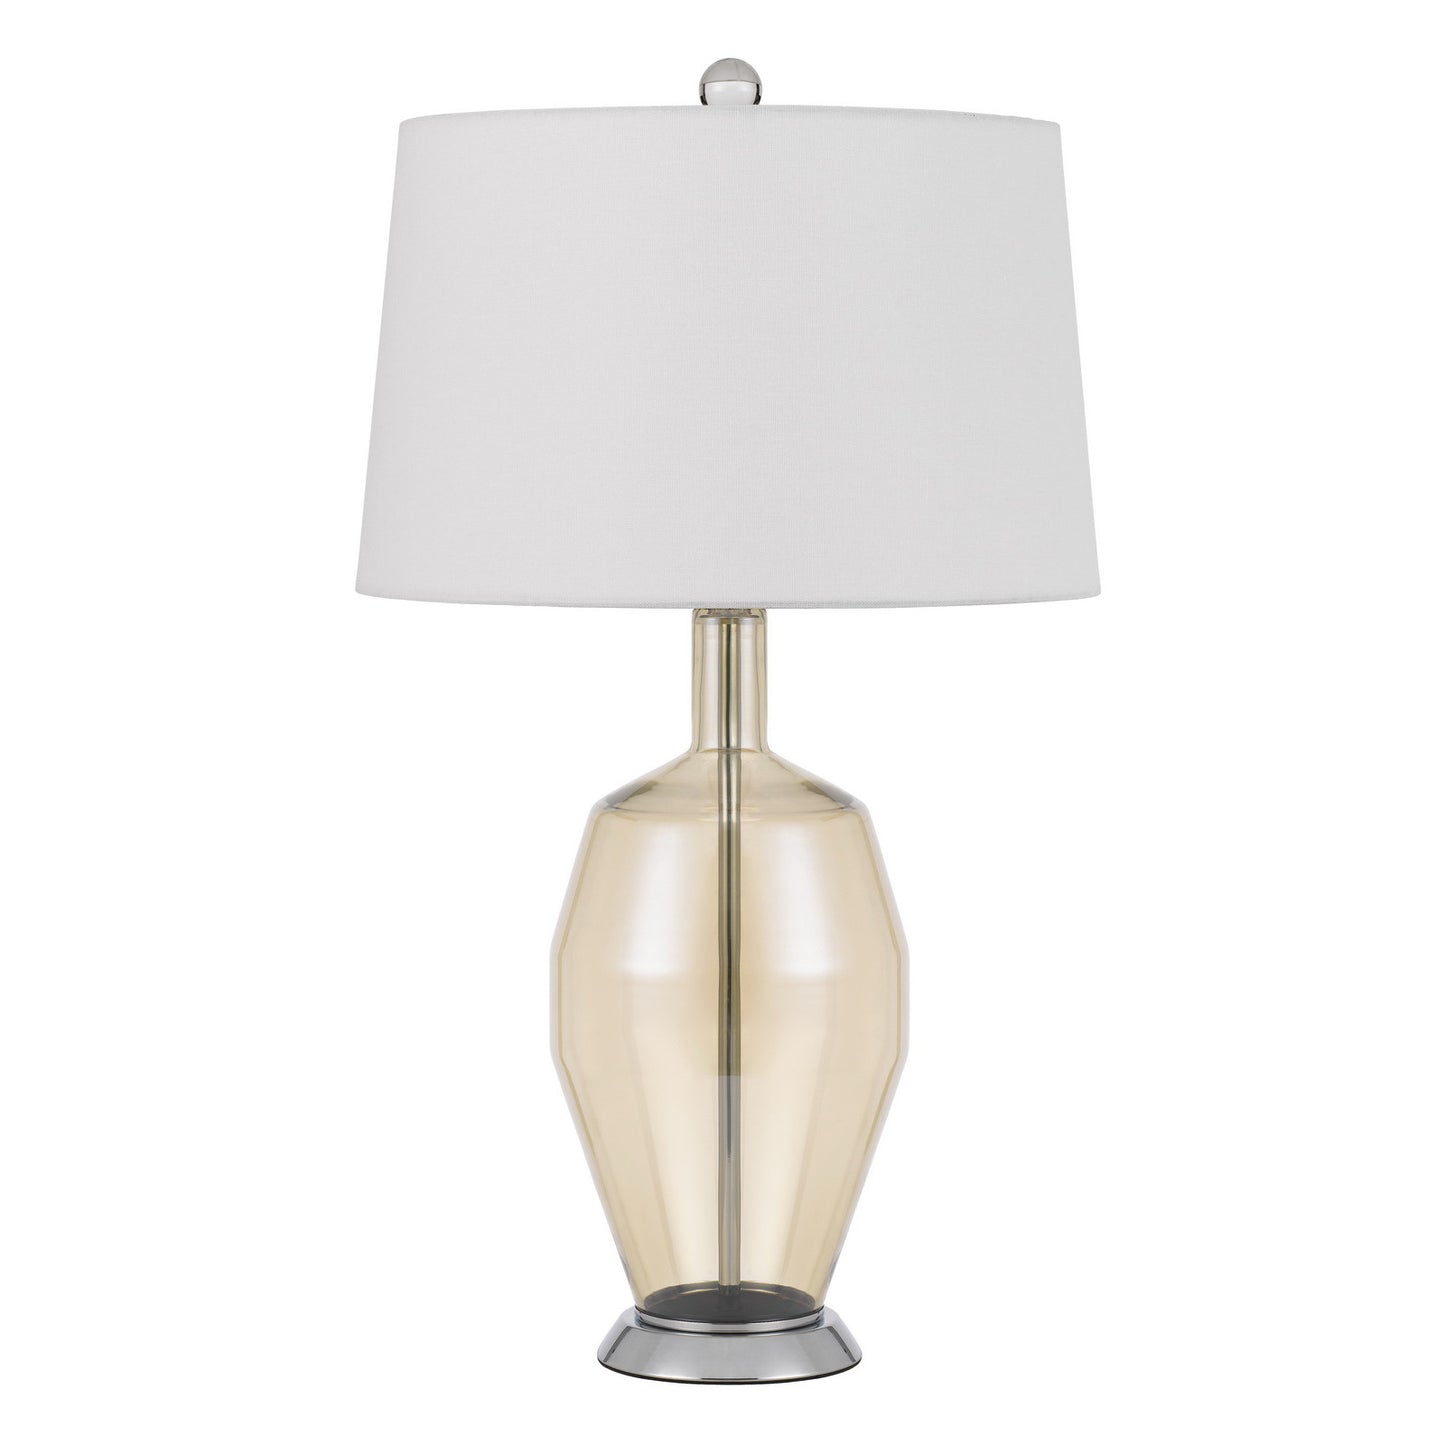 29" Nickel Metal Round Table Lamp With White Drum Shade